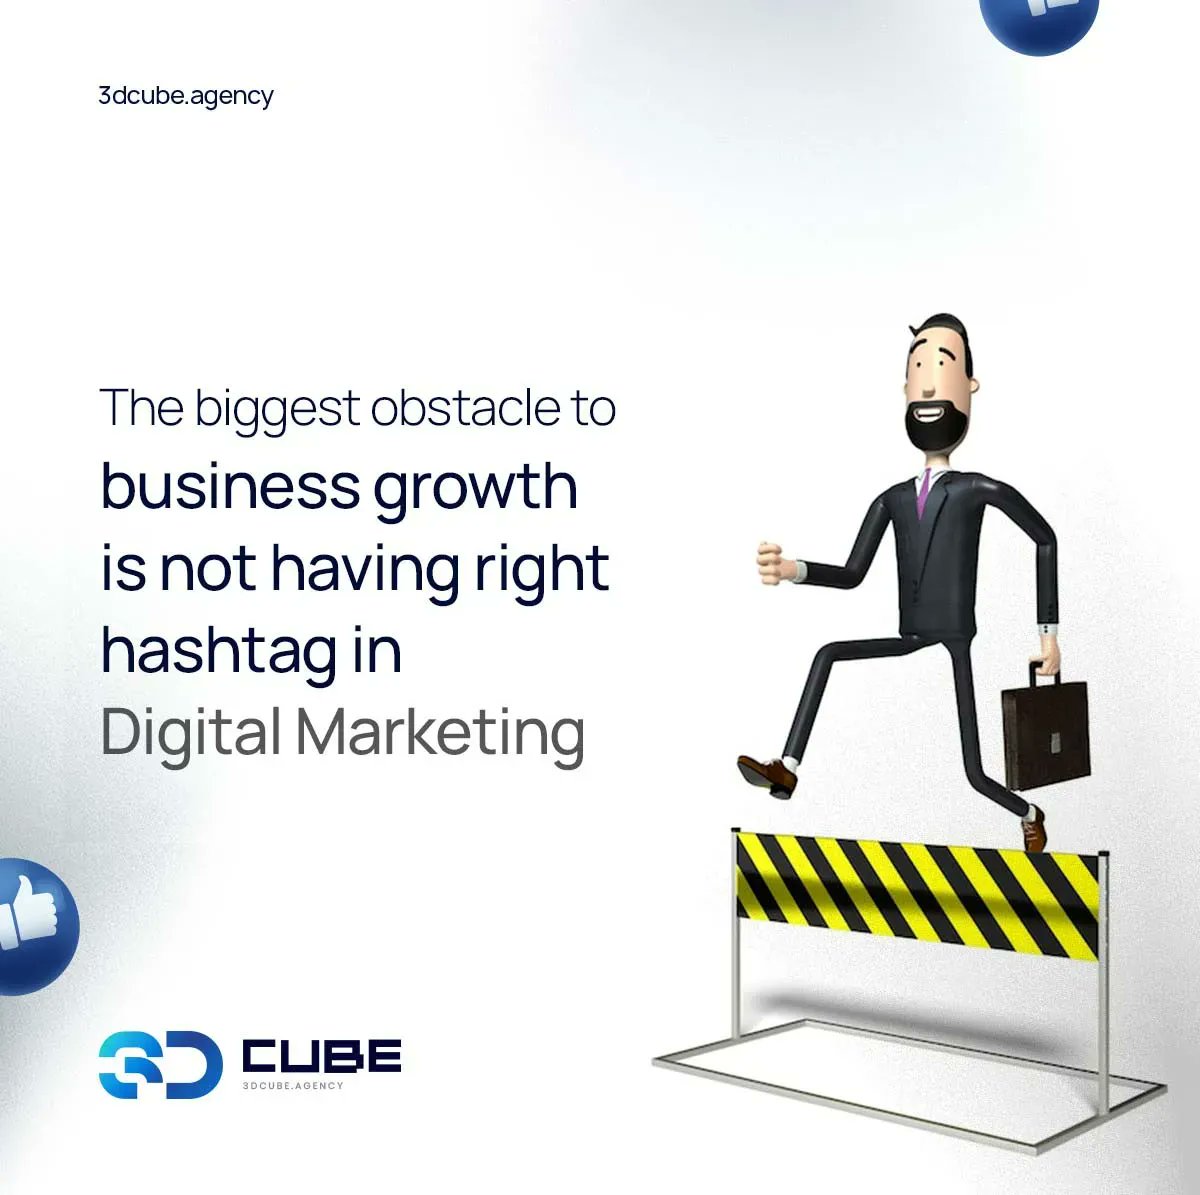 No hashtag, no growth! Make sure to use the right ones in your digital marketing efforts to boost your business!

Visit: buff.ly/3WrEMLI

#3dCube #3dCubeAgency #Hashtags #growth #businessgrowth #Agency #Marketingagency #digitalmarketingusa #digitalagency #facts